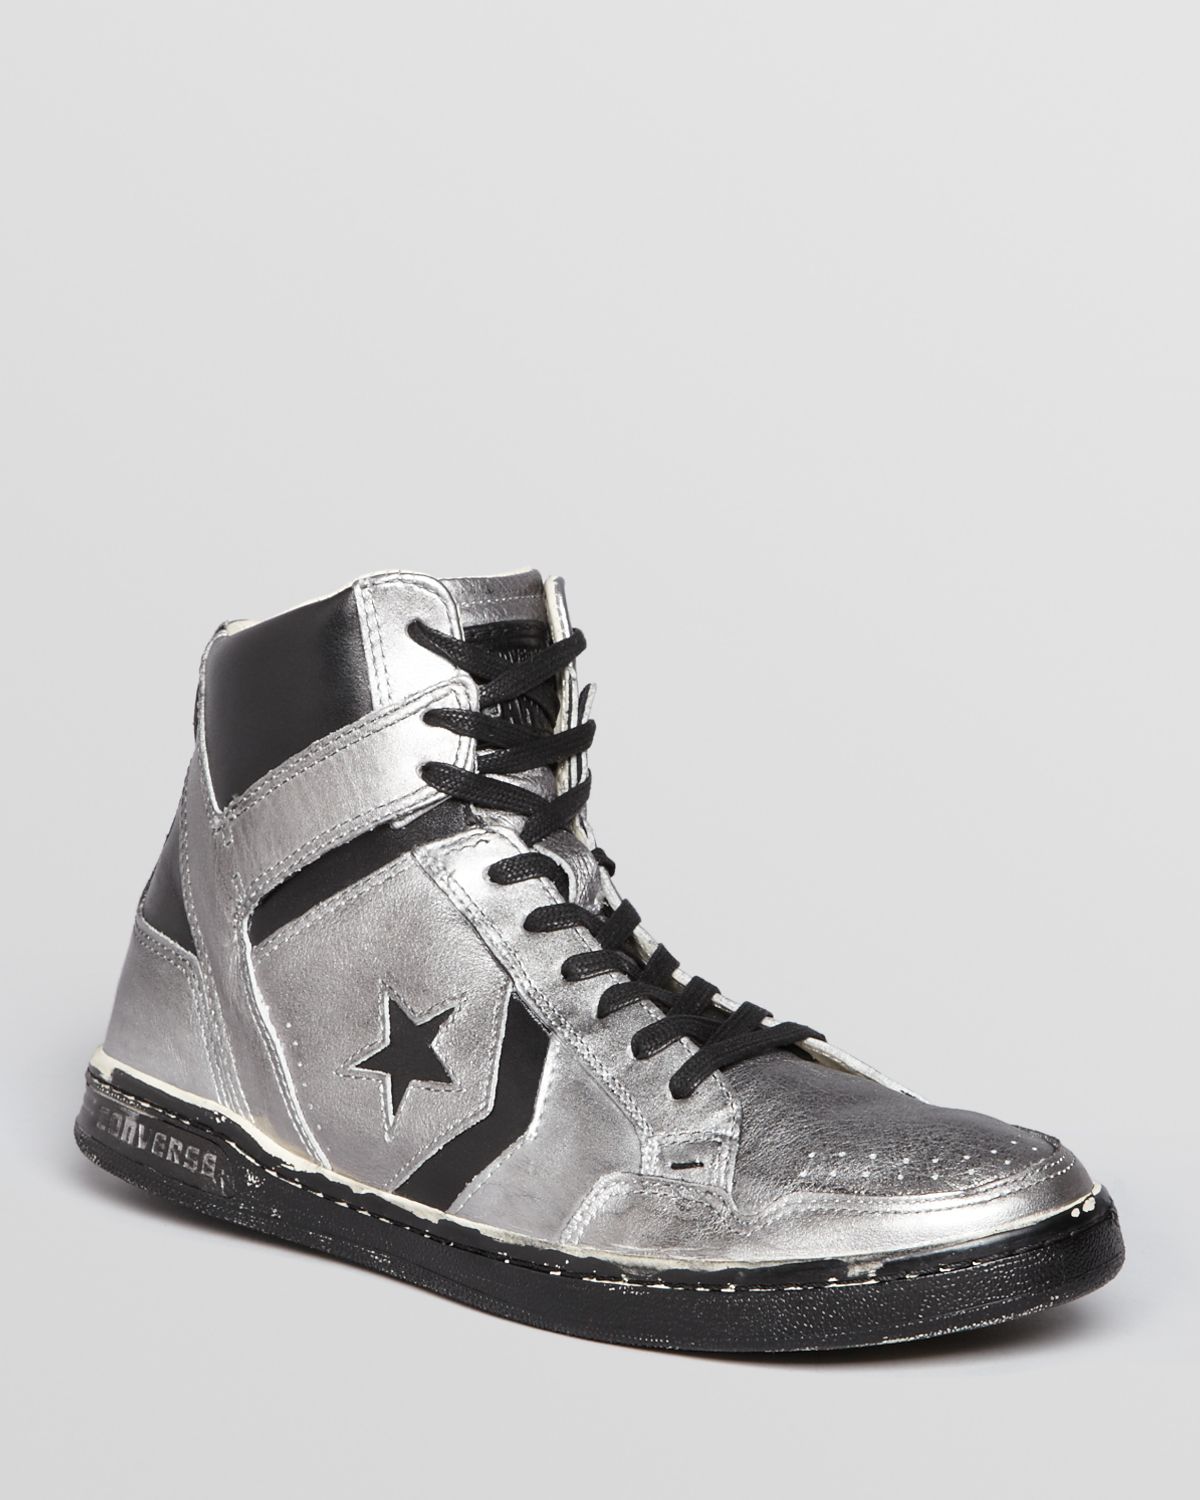 Converse By John Varvatos Weapon Metallic Leather High Top Sneakers for Men  - Lyst